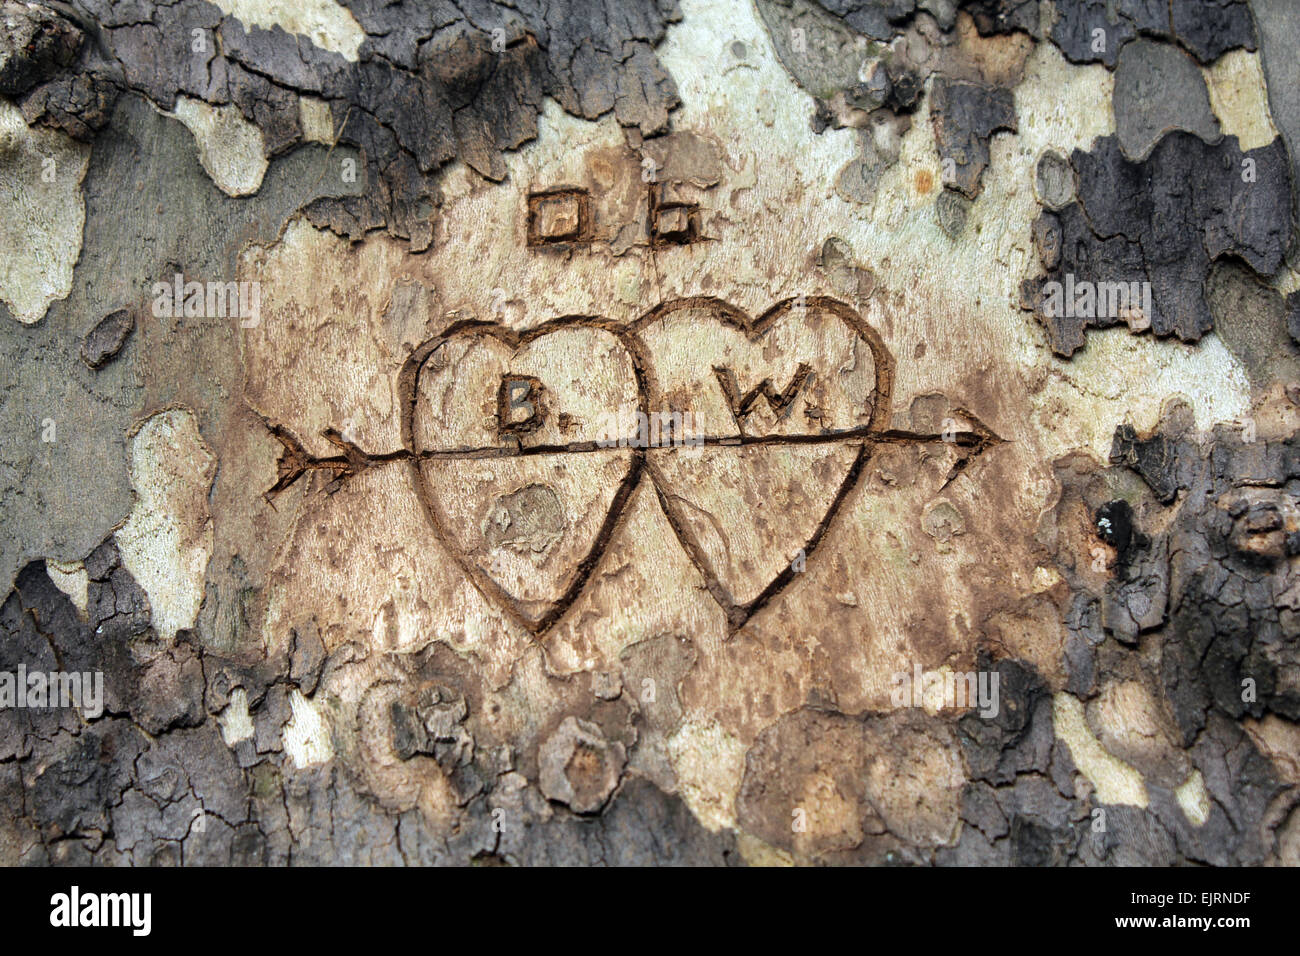 Initials with hearts around them are carved into the side of a tree Stock Photo